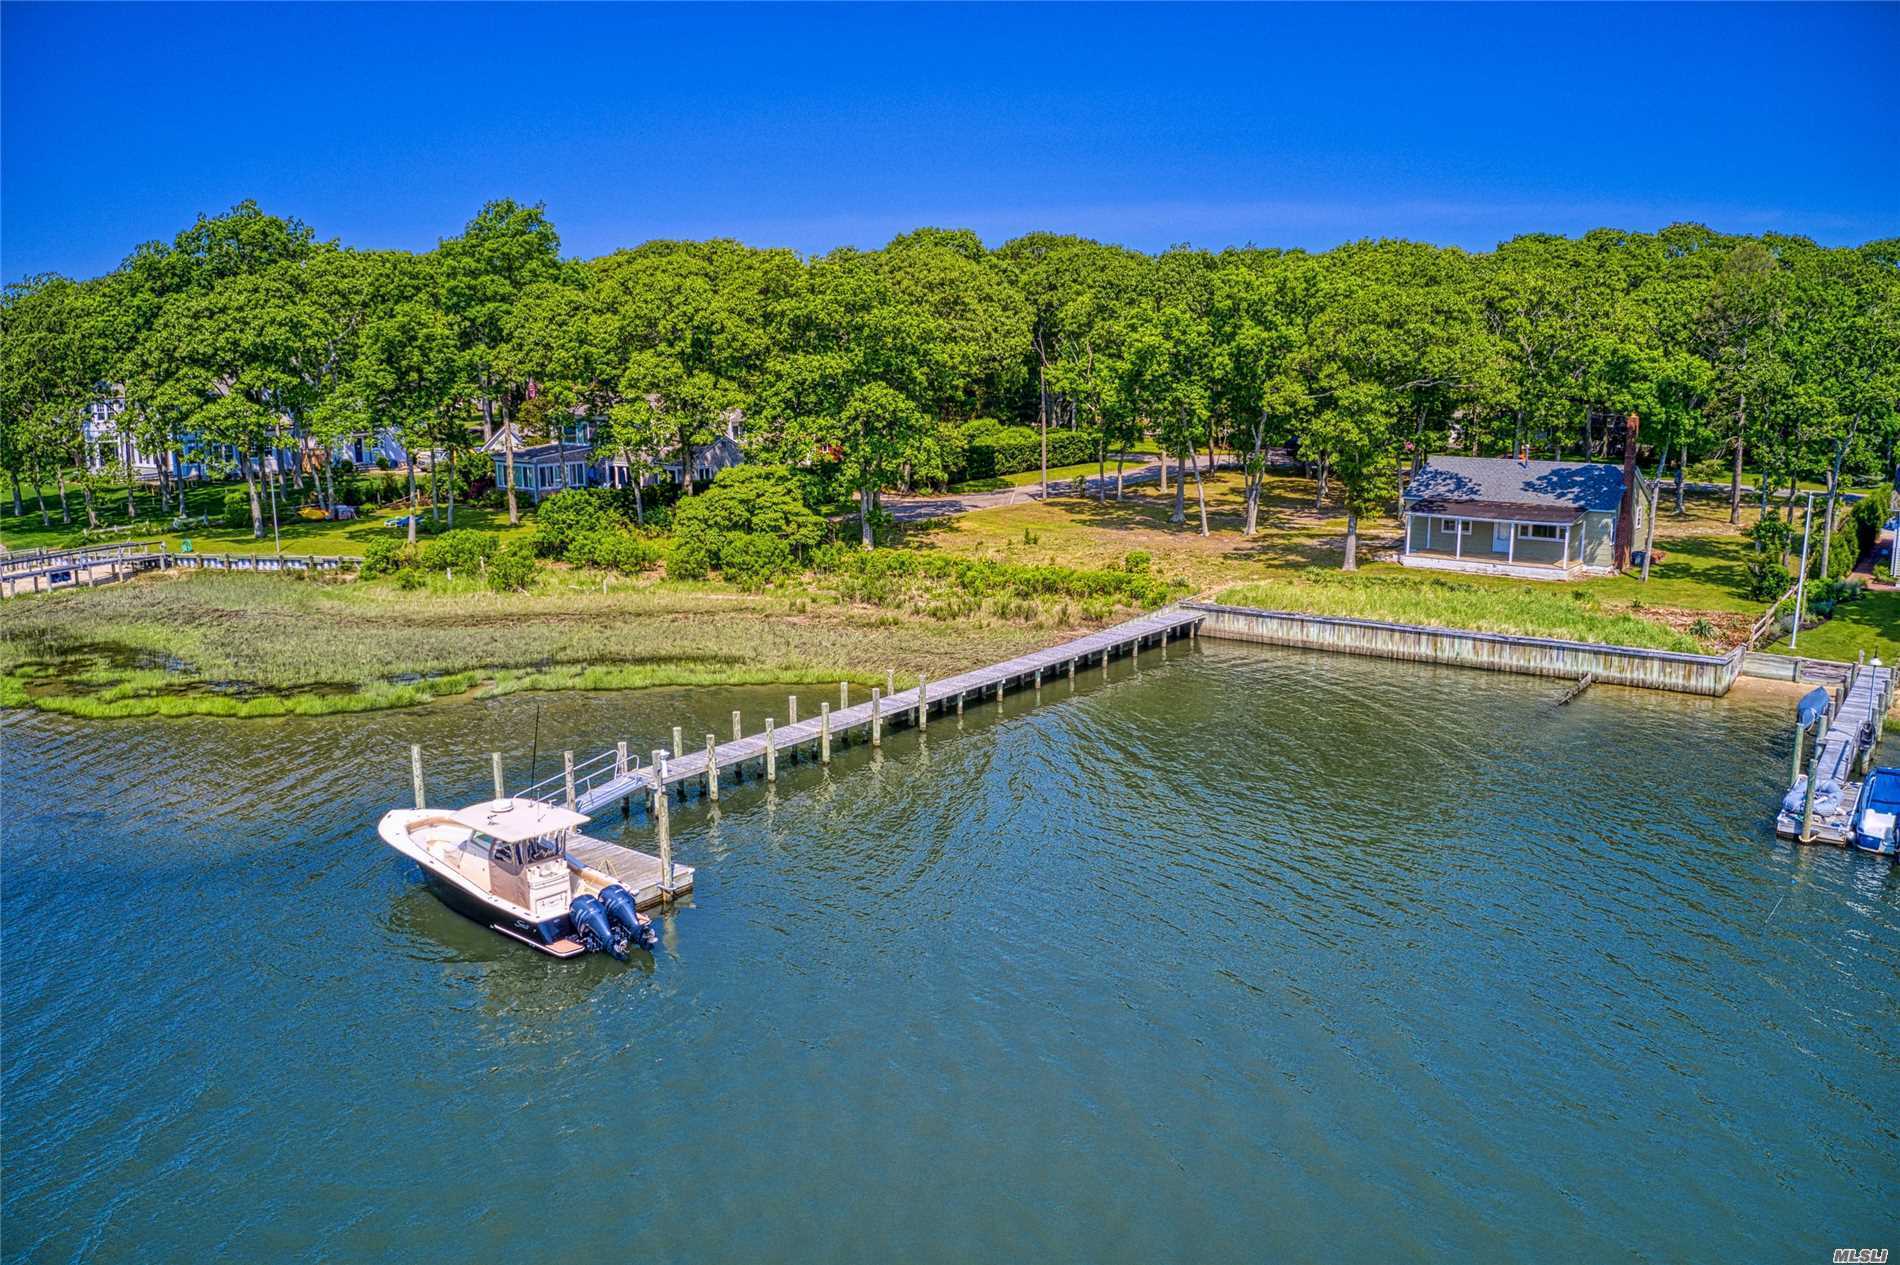 One of the last double lots on Broadwater&rsquo;s Cove. Big water view. Paradise awaits you in Cutchogue, NY&rsquo;s sunniest village at this pristine cottage w/160&rsquo; waterfrontage. The bright & airy 2-bedroom home features a wood burning fireplace, ideal for cozy nights, as well as a bulkhead and new dock. The premier Broadwater&rsquo;s Cove Ass&rsquo;n w/ boating access to the Peconic Bay & beyond is a coveted spot by Nassau Point causeway beach. Enjoy this season at the cottage while planning dream home.